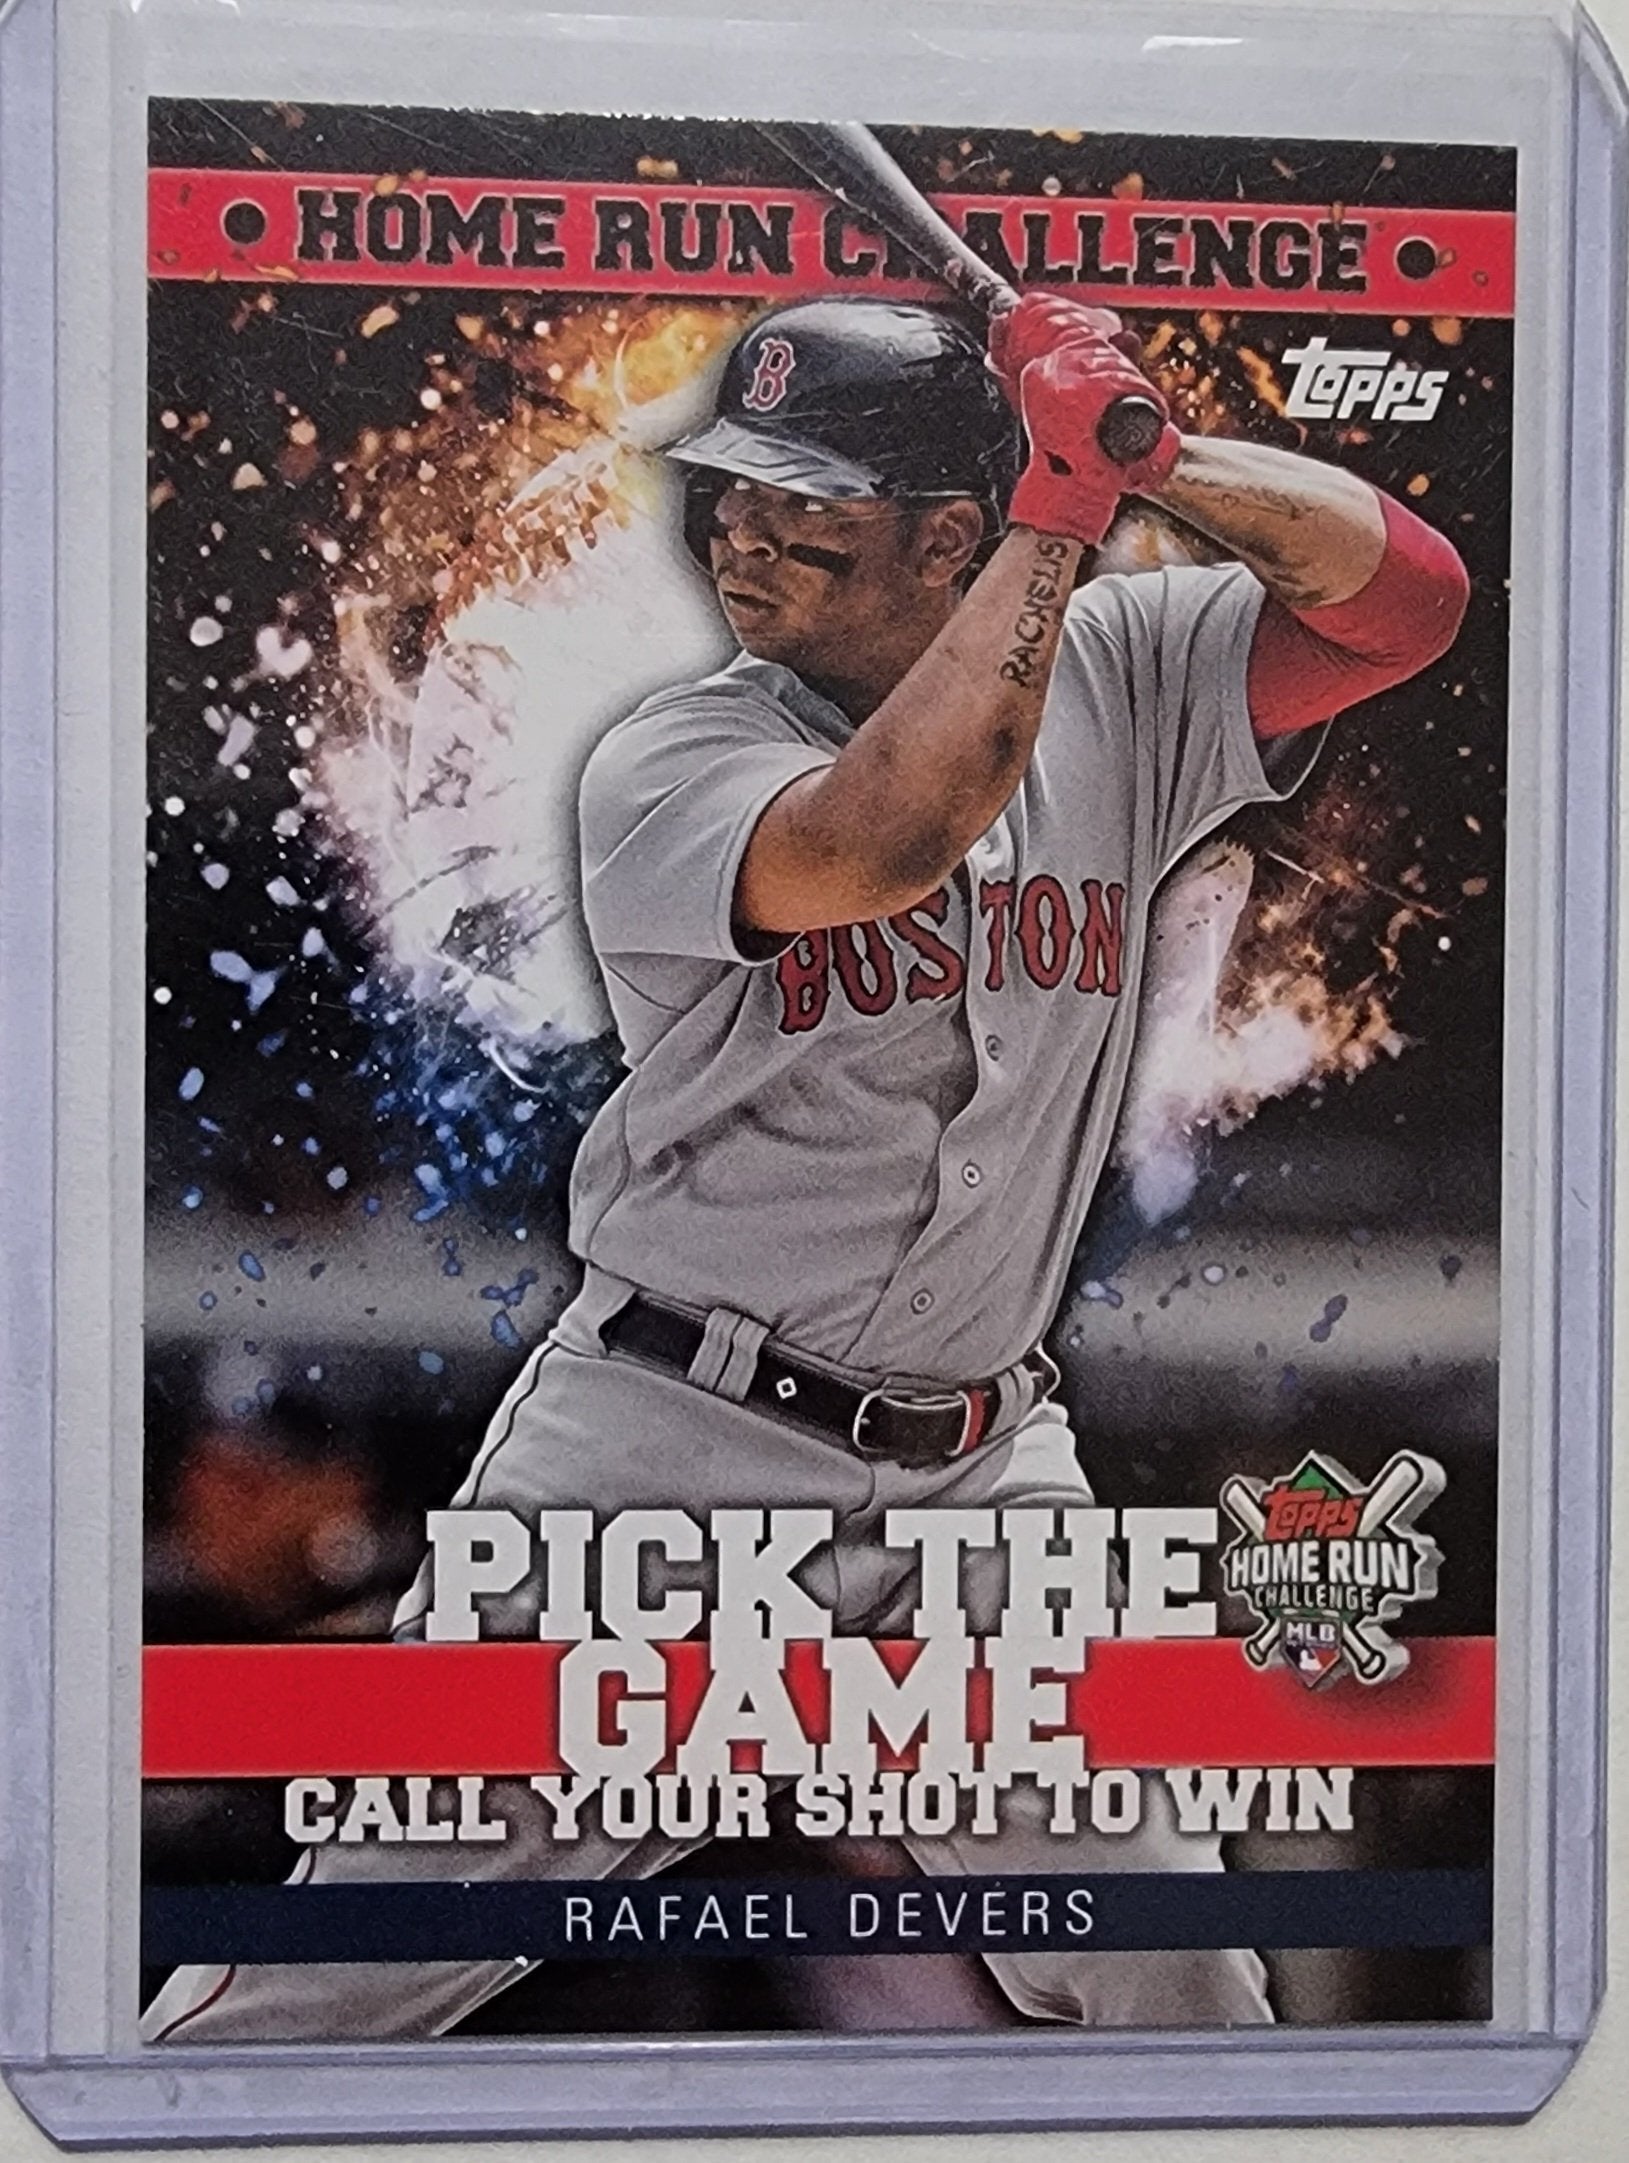 2022 Topps Series 2 Rafael Devers Pick the Game Unscratched Insert Baseball Card AVM1 simple Xclusive Collectibles   